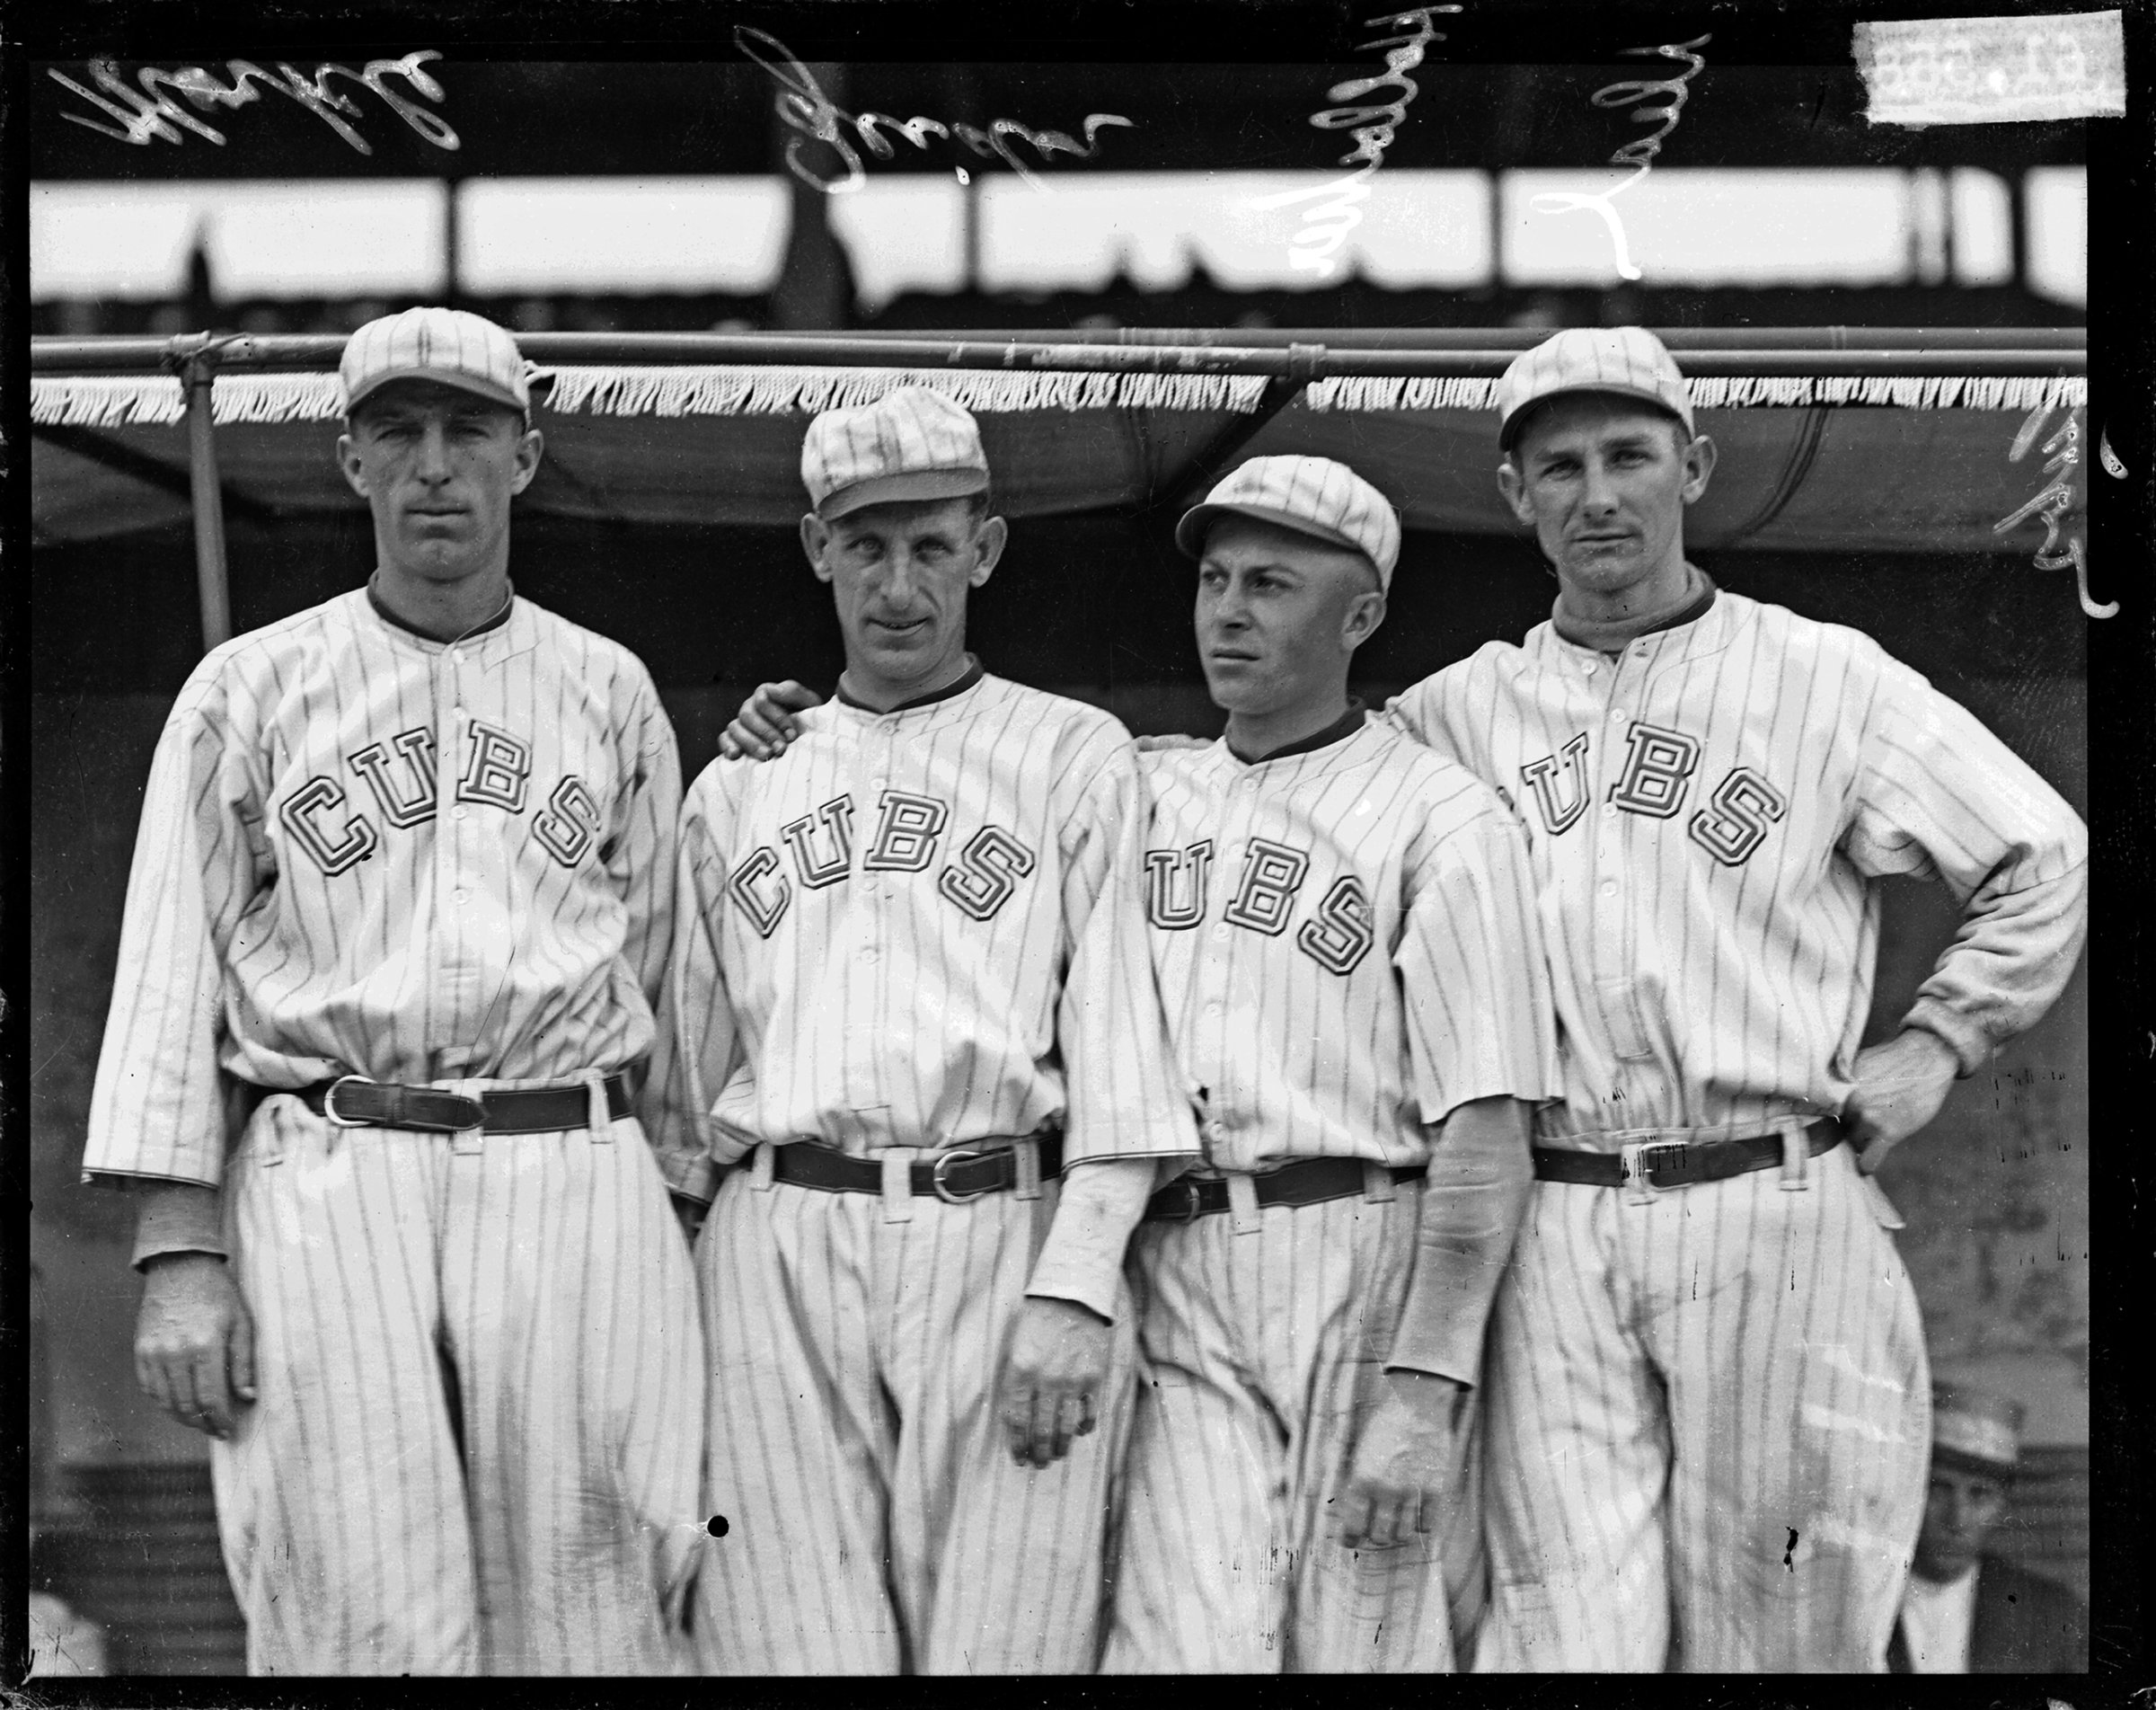 Chicago Cubs baseball players Merkle, Zeider, Charles Hollocher, and Deal standing in front of a dugout at Weeghman Park, Chicago, Illinois, 1918.